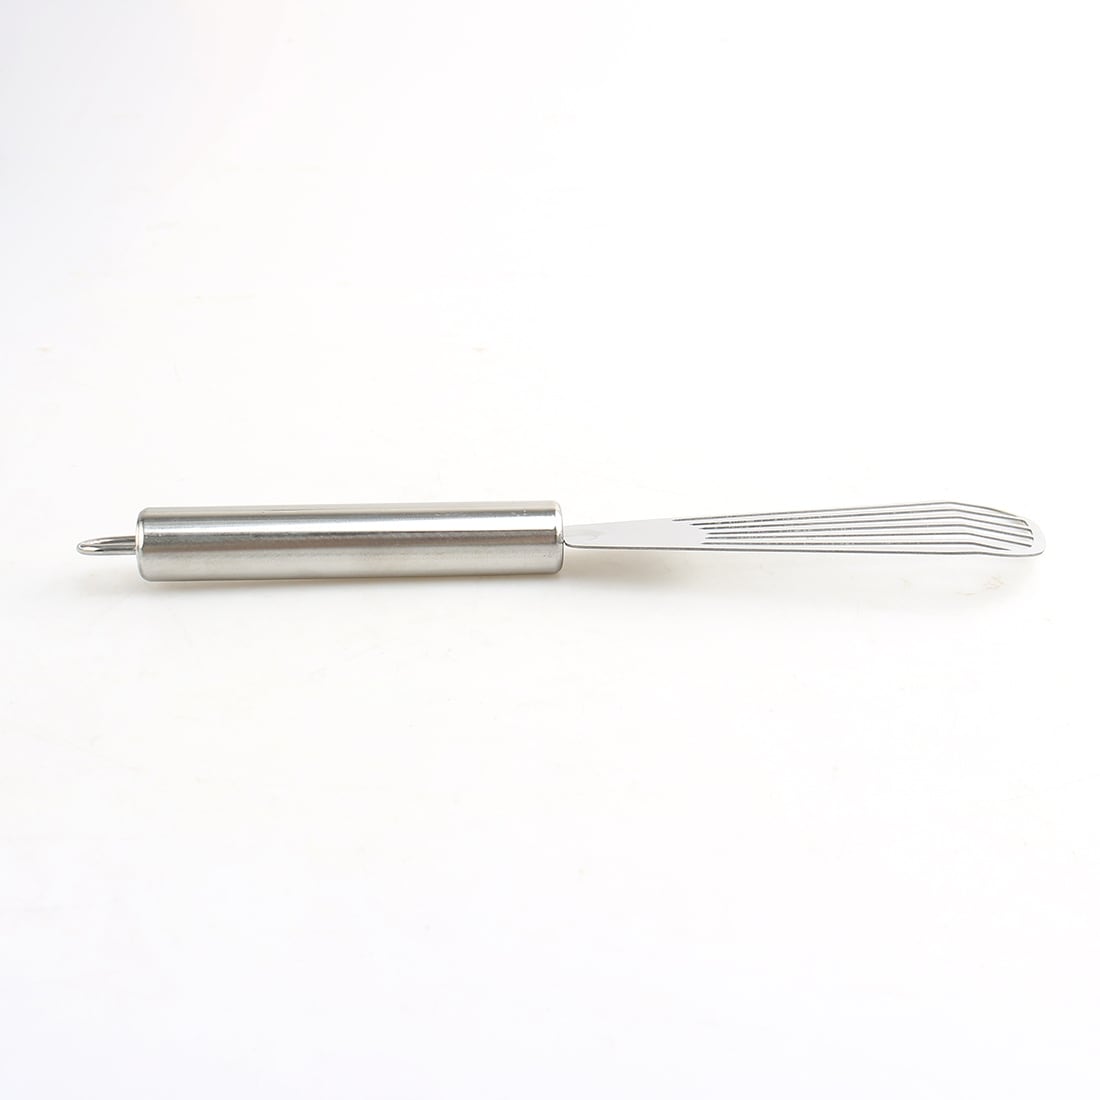 https://ak1.ostkcdn.com/images/products/is/images/direct/ac415b213eec0b2ceabe4a913e6507d80388e86c/Stainless-Steel-Cooking-Spatula-Slotted-Pancake-Turner-2PCS.jpg